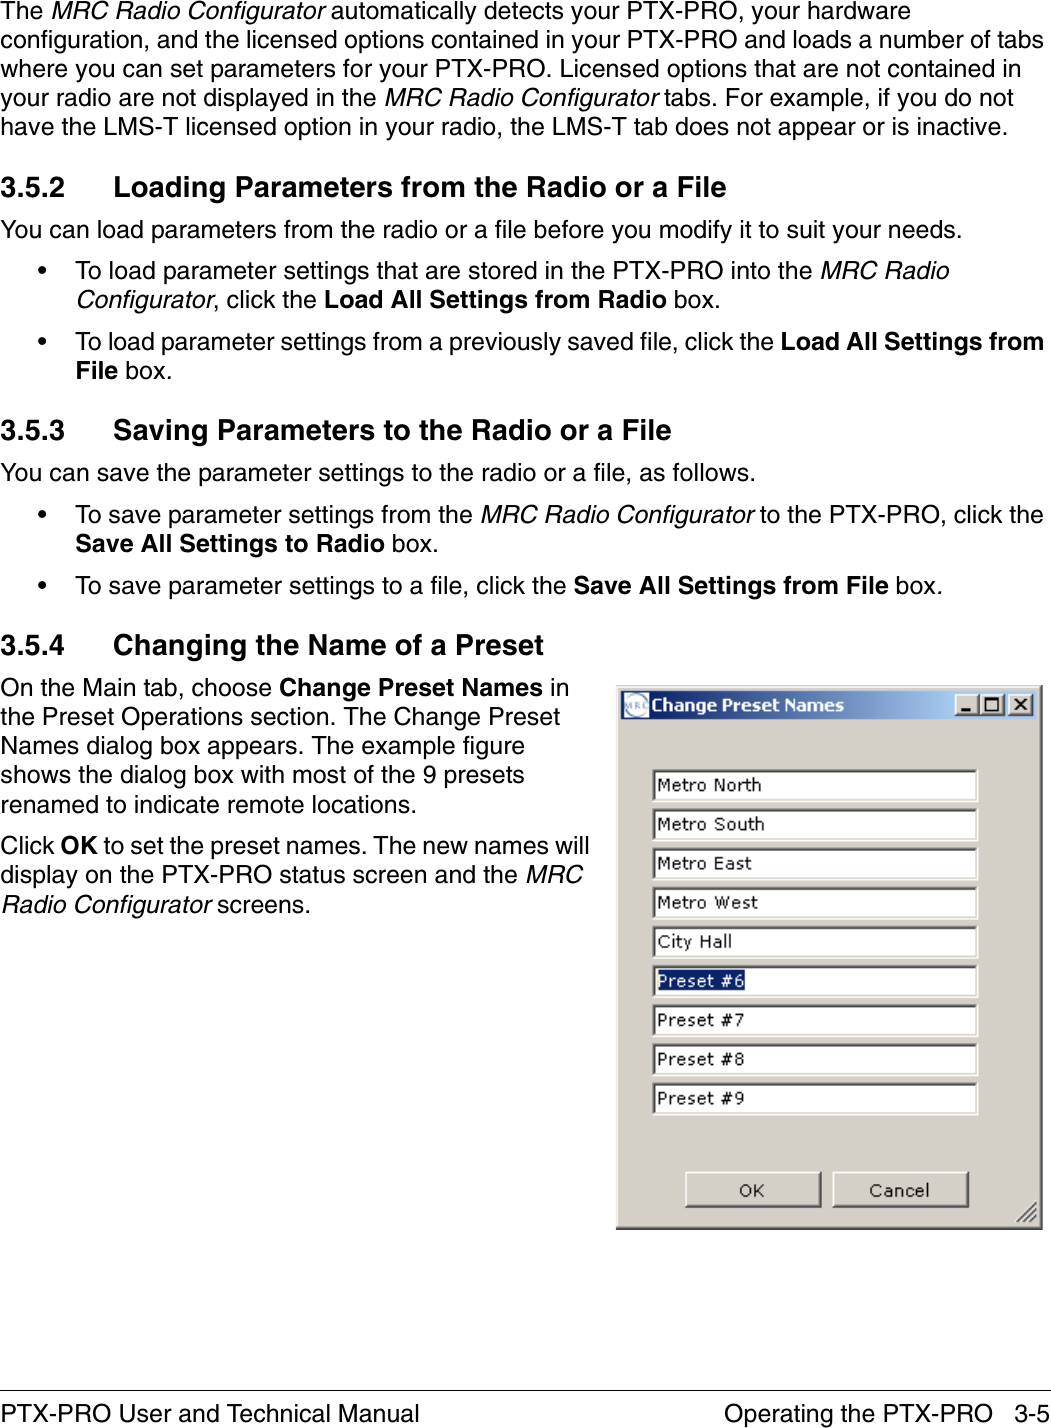 Operating the PTX-PRO   3-5PTX-PRO User and Technical ManualThe MRC Radio Configurator automatically detects your PTX-PRO, your hardware configuration, and the licensed options contained in your PTX-PRO and loads a number of tabs where you can set parameters for your PTX-PRO. Licensed options that are not contained in your radio are not displayed in the MRC Radio Configurator tabs. For example, if you do not have the LMS-T licensed option in your radio, the LMS-T tab does not appear or is inactive.3.5.2 Loading Parameters from the Radio or a FileYou can load parameters from the radio or a file before you modify it to suit your needs.• To load parameter settings that are stored in the PTX-PRO into the MRC Radio Configurator, click the Load All Settings from Radio box.• To load parameter settings from a previously saved file, click the Load All Settings from File box.3.5.3 Saving Parameters to the Radio or a FileYou can save the parameter settings to the radio or a file, as follows.• To save parameter settings from the MRC Radio Configurator to the PTX-PRO, click the Save All Settings to Radio box.• To save parameter settings to a file, click the Save All Settings from File box.3.5.4 Changing the Name of a PresetOn the Main tab, choose Change Preset Names in the Preset Operations section. The Change Preset Names dialog box appears. The example figure shows the dialog box with most of the 9 presets renamed to indicate remote locations.Click OK to set the preset names. The new names will display on the PTX-PRO status screen and the MRC Radio Configurator screens.